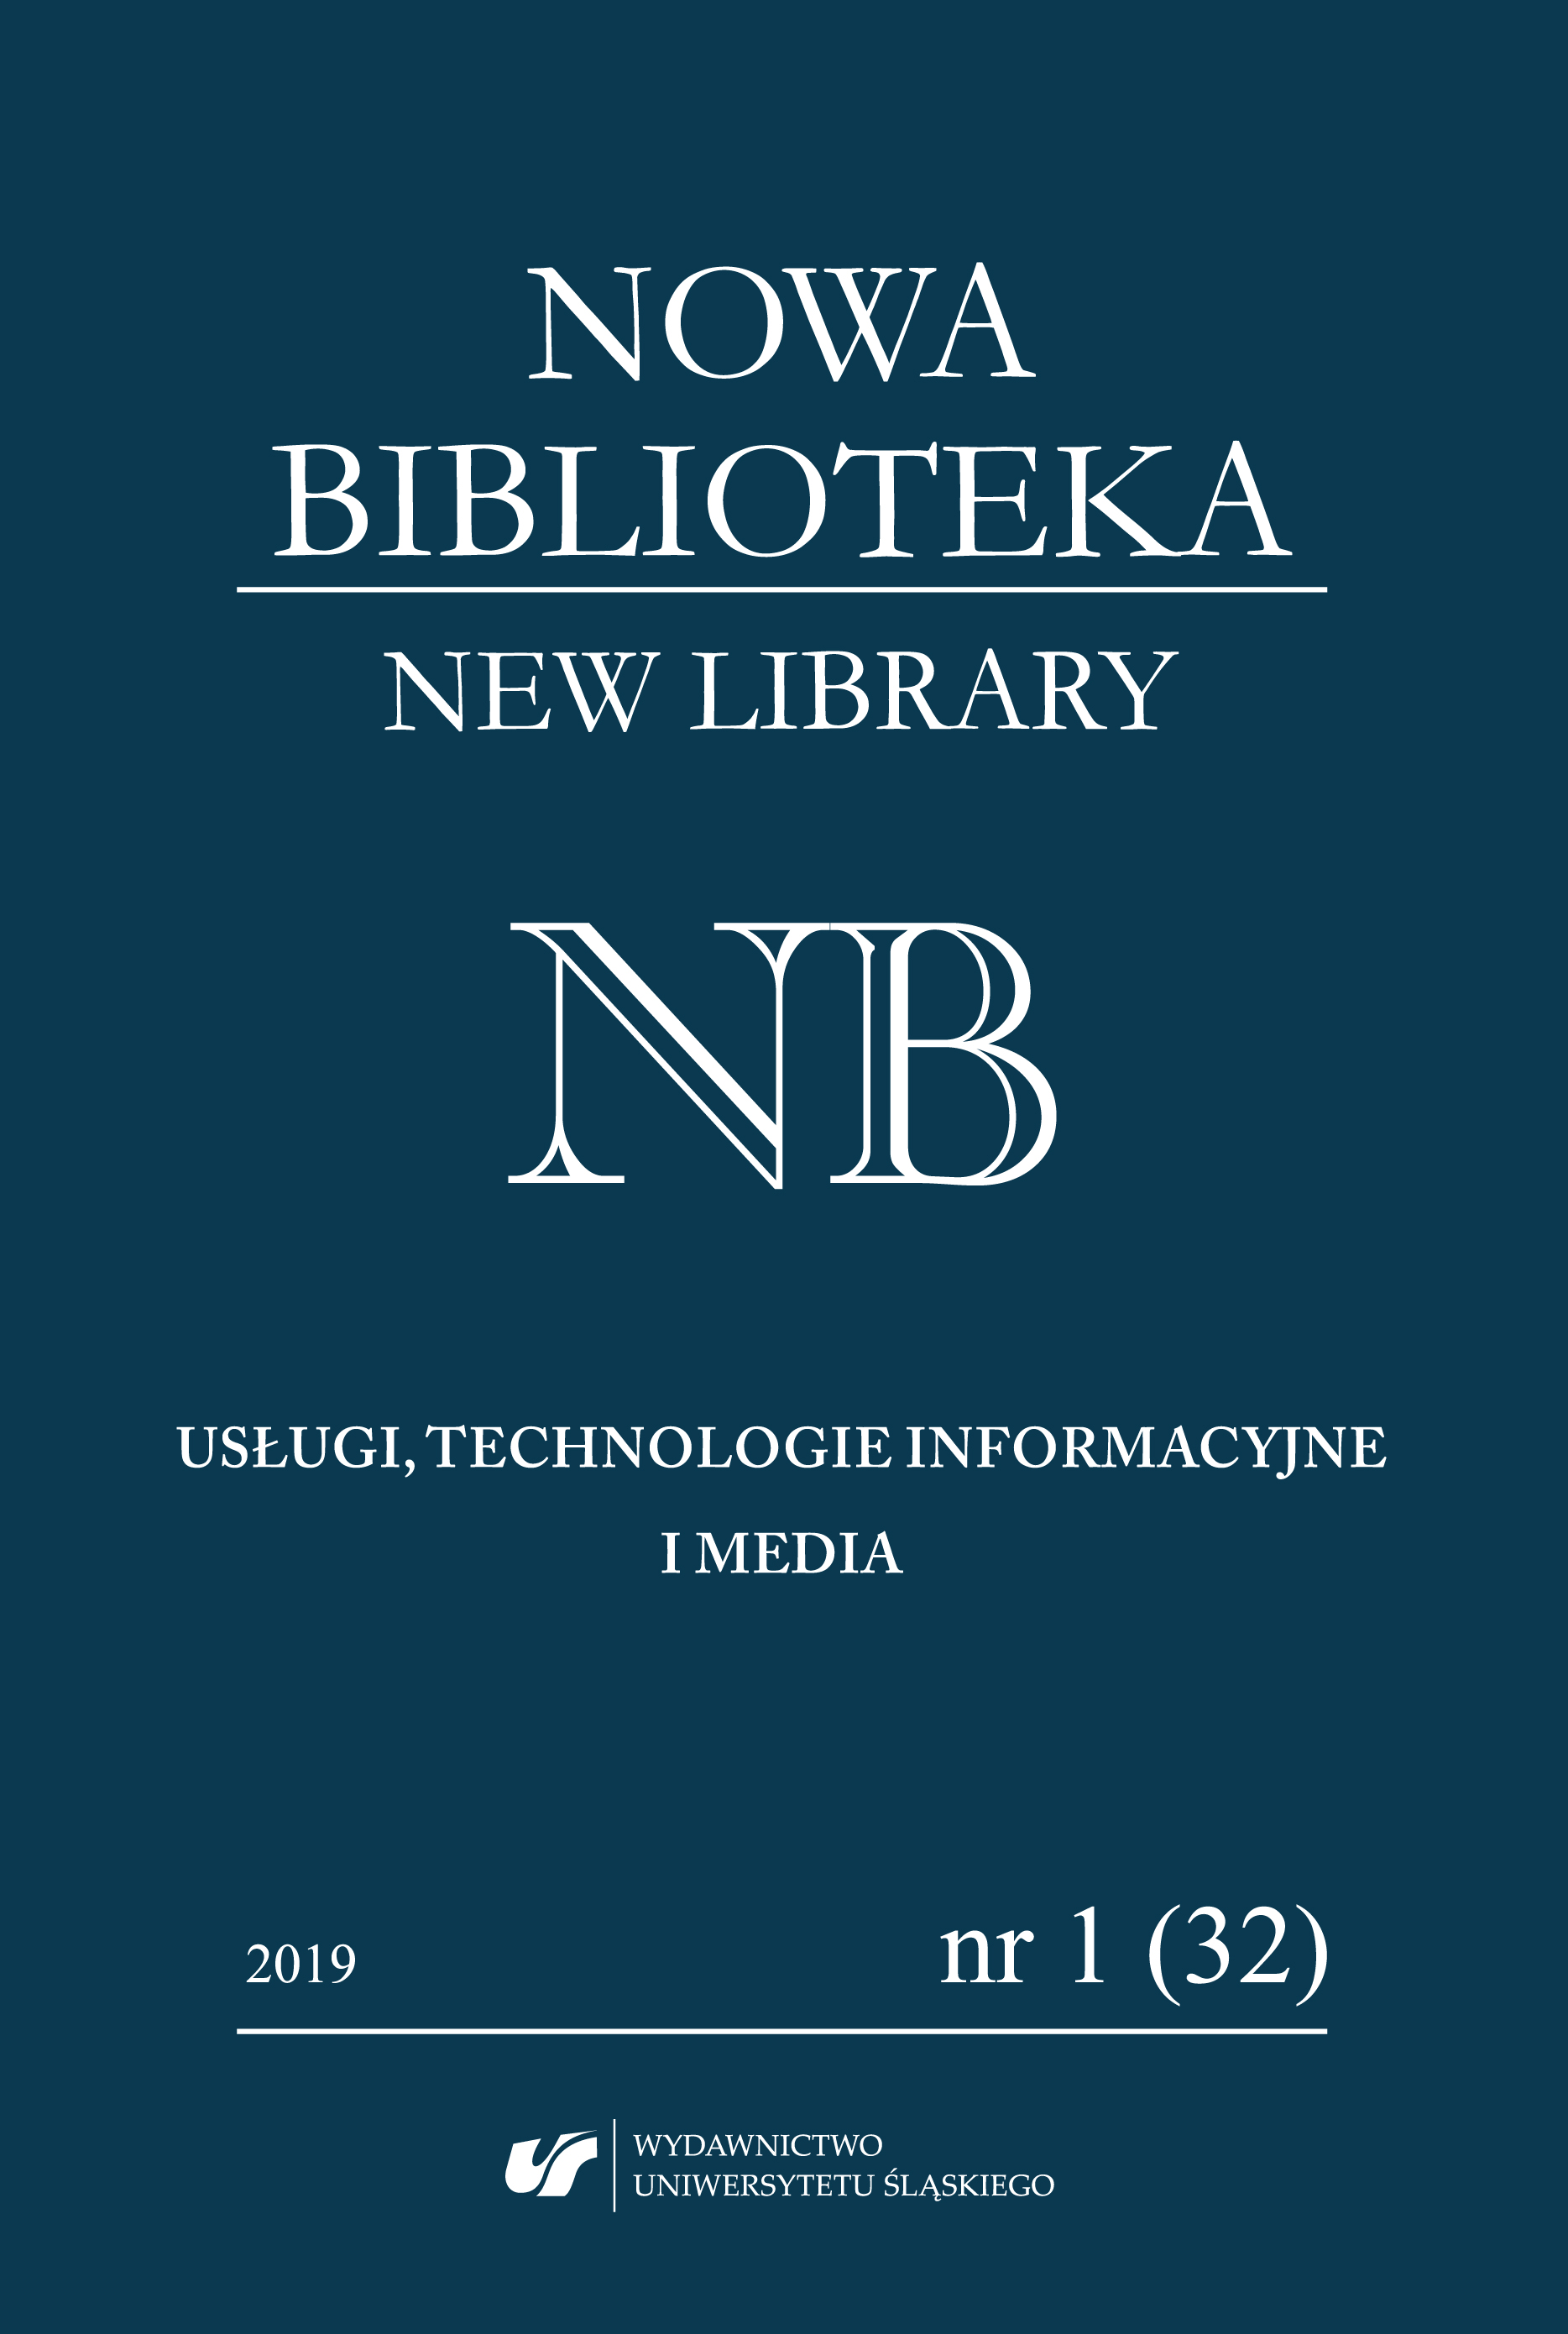 A Conference of the Federation of Church Libraries FIDES, of the Section of the Libraries of Schools of Higher Education of the Association of Polish Librarians at the District Board in Katowice and of the Theological Library of the University of Sil Cover Image